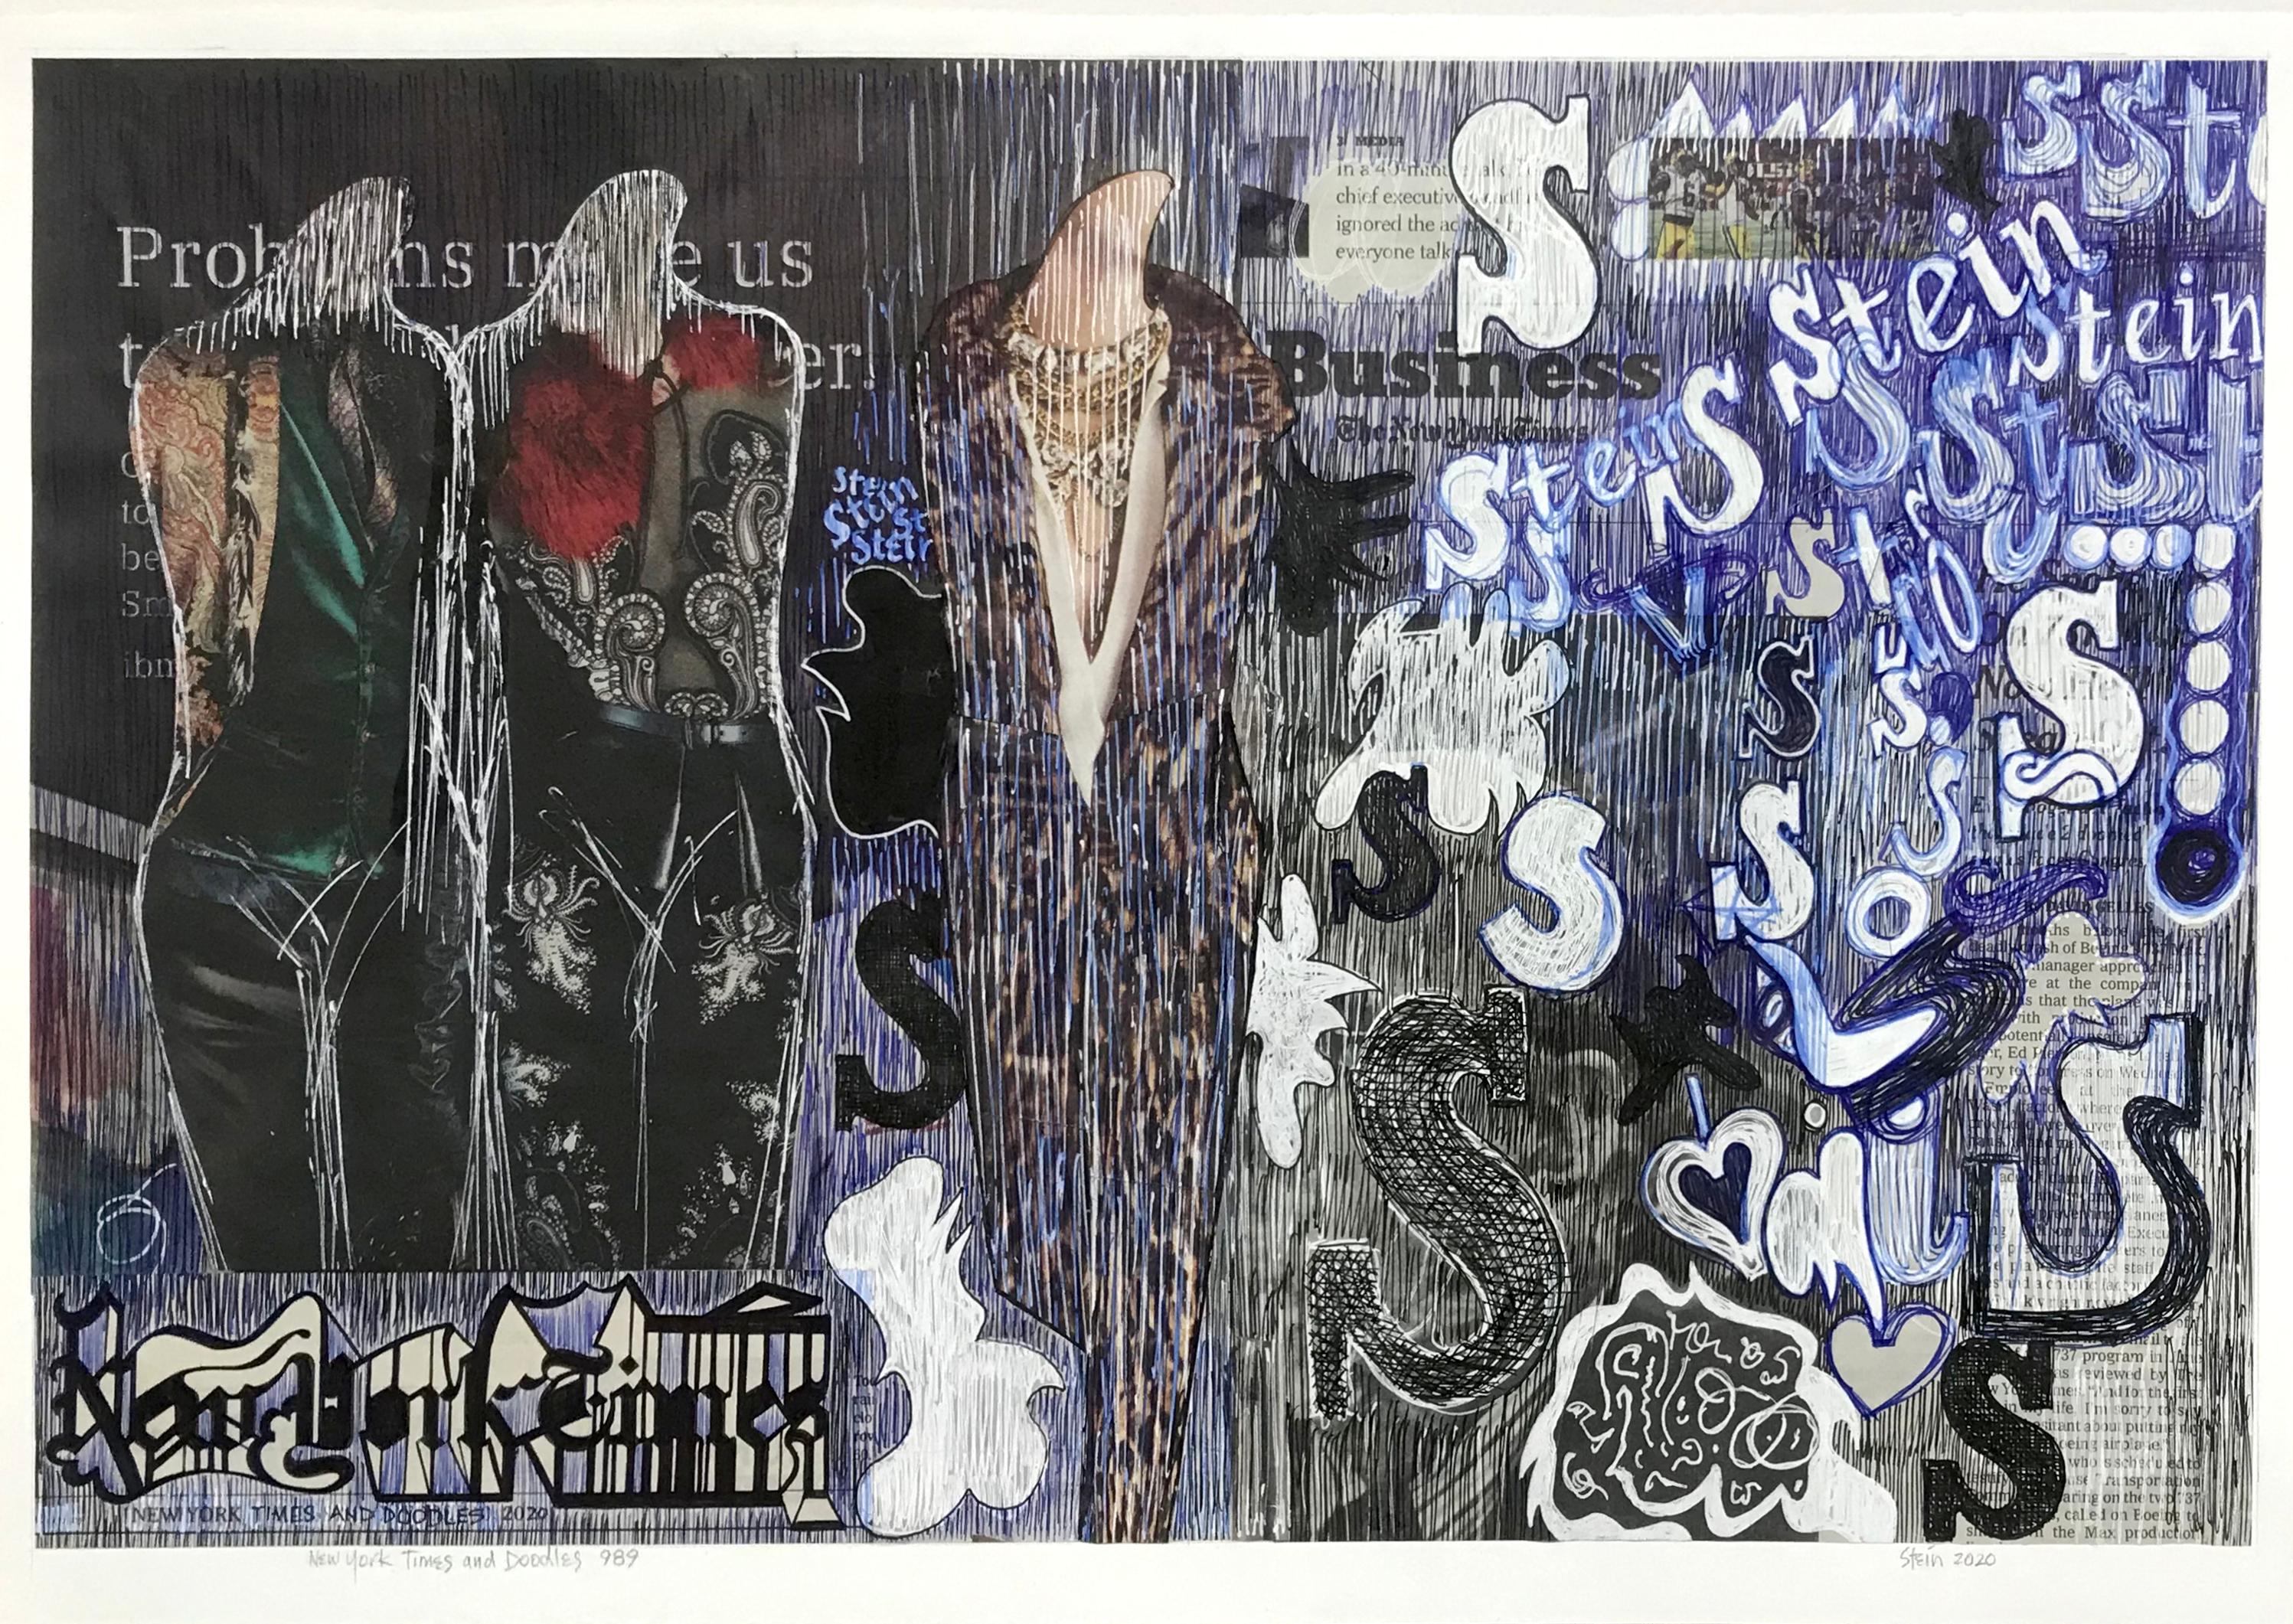 Linda Stein, New York Times and Doodles 989 - Contemporary Art Drawing Collage

Linda Stein started her Knights of Protection series after she was forced to evacuate her New York downtown studio for a year post-9/11.  Stein's Knights are shield-like